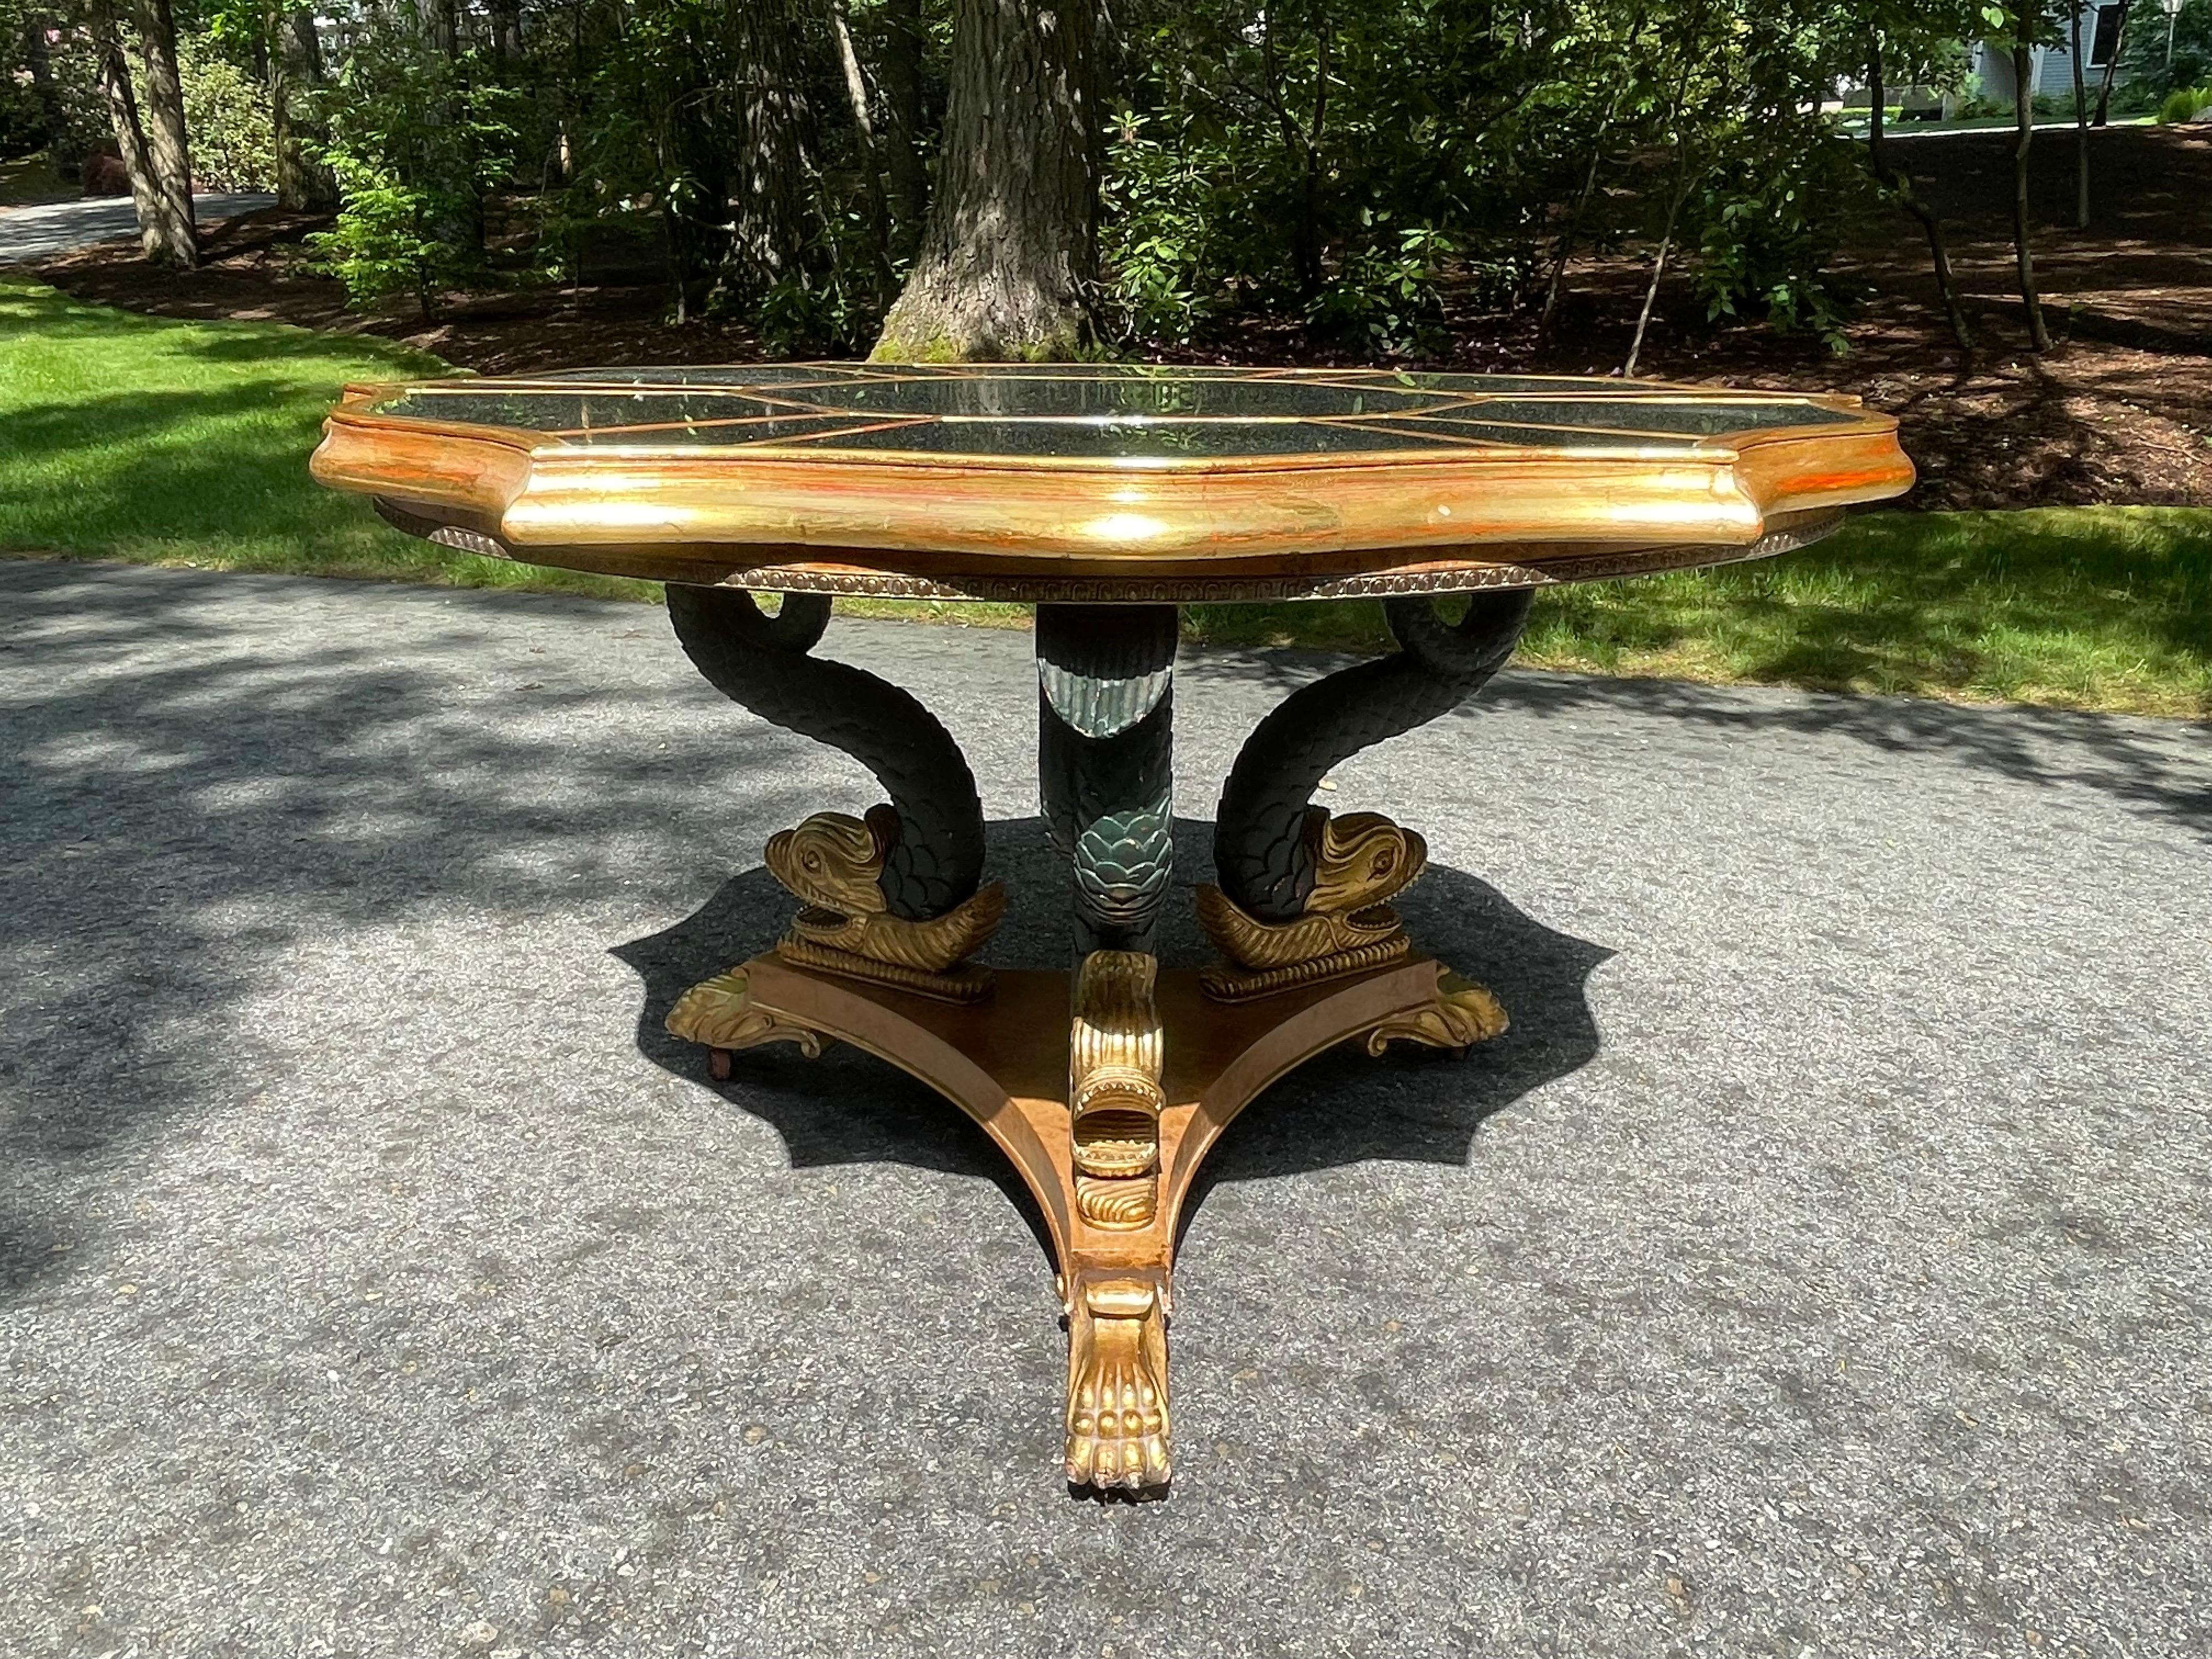 Three beautifully hand carved dolphins rest on a three sided burr Walnut inlaid platform. Their tails support an antique mirrored six sided scalloped top guided in 24k gold.
The design is after English architect and furniture designer William Kent.